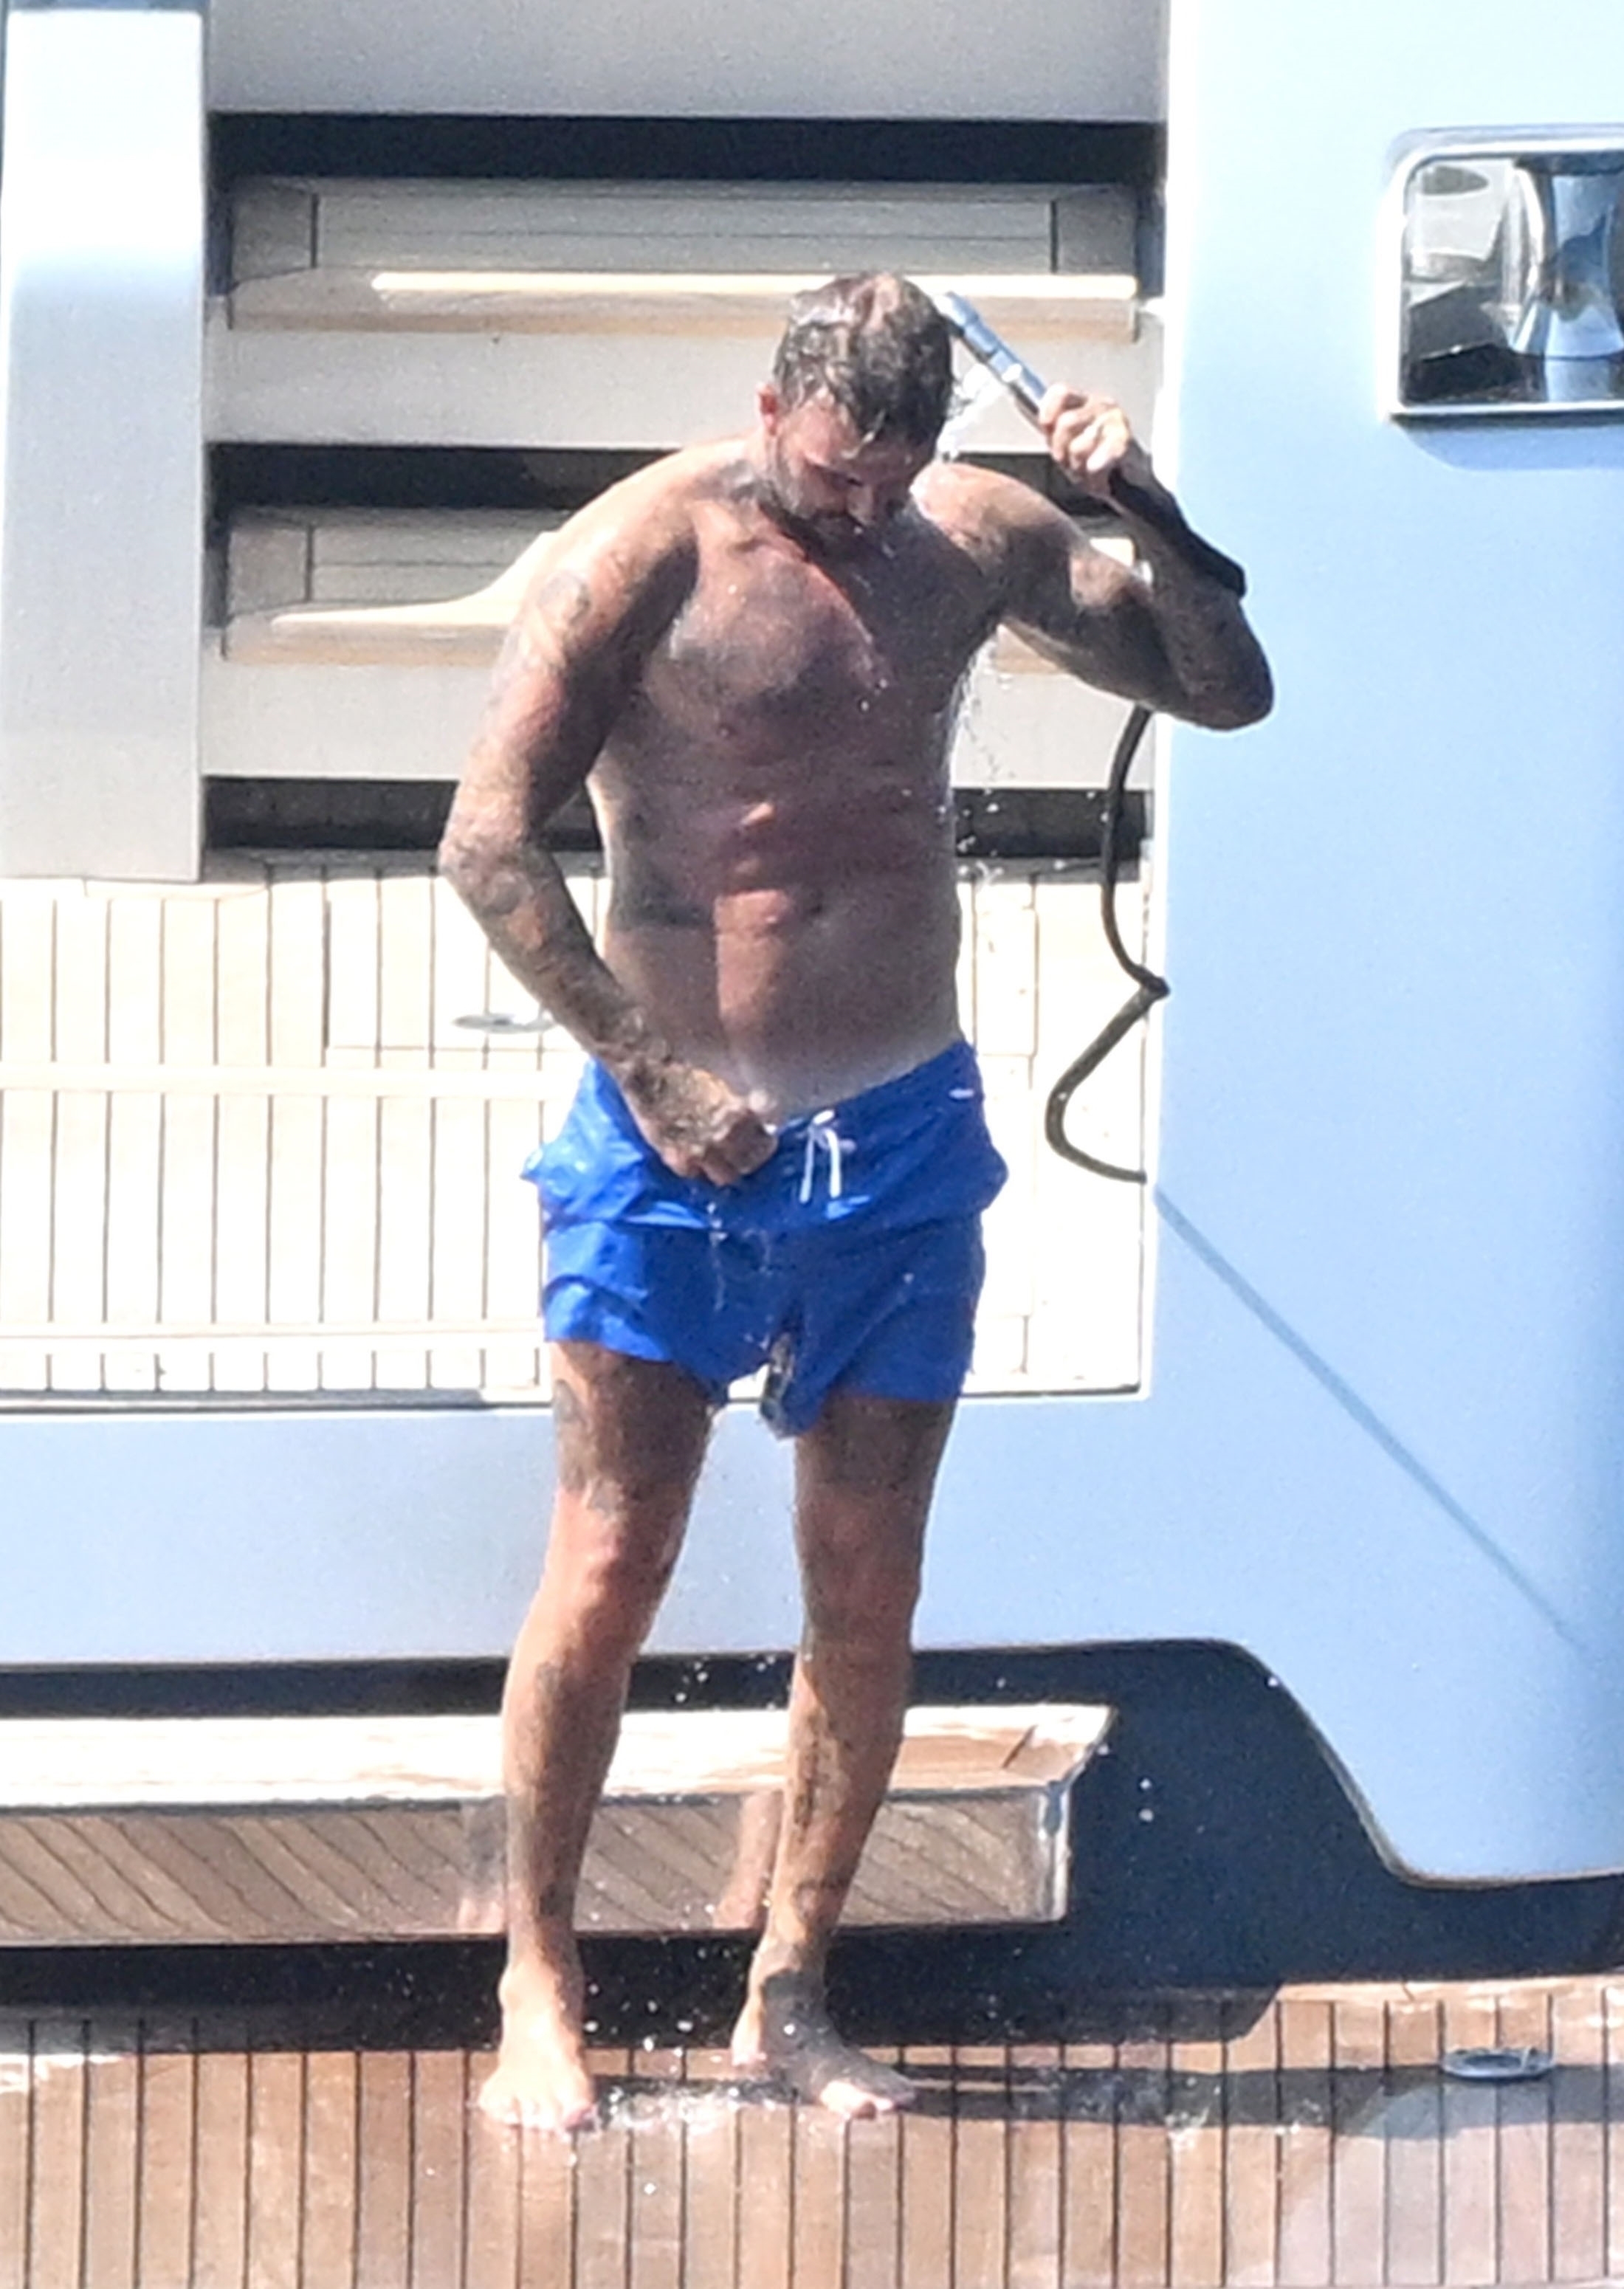 David pulled his blue swimming shorts up high to expose his impressive thigh tattoos before hitting the shower